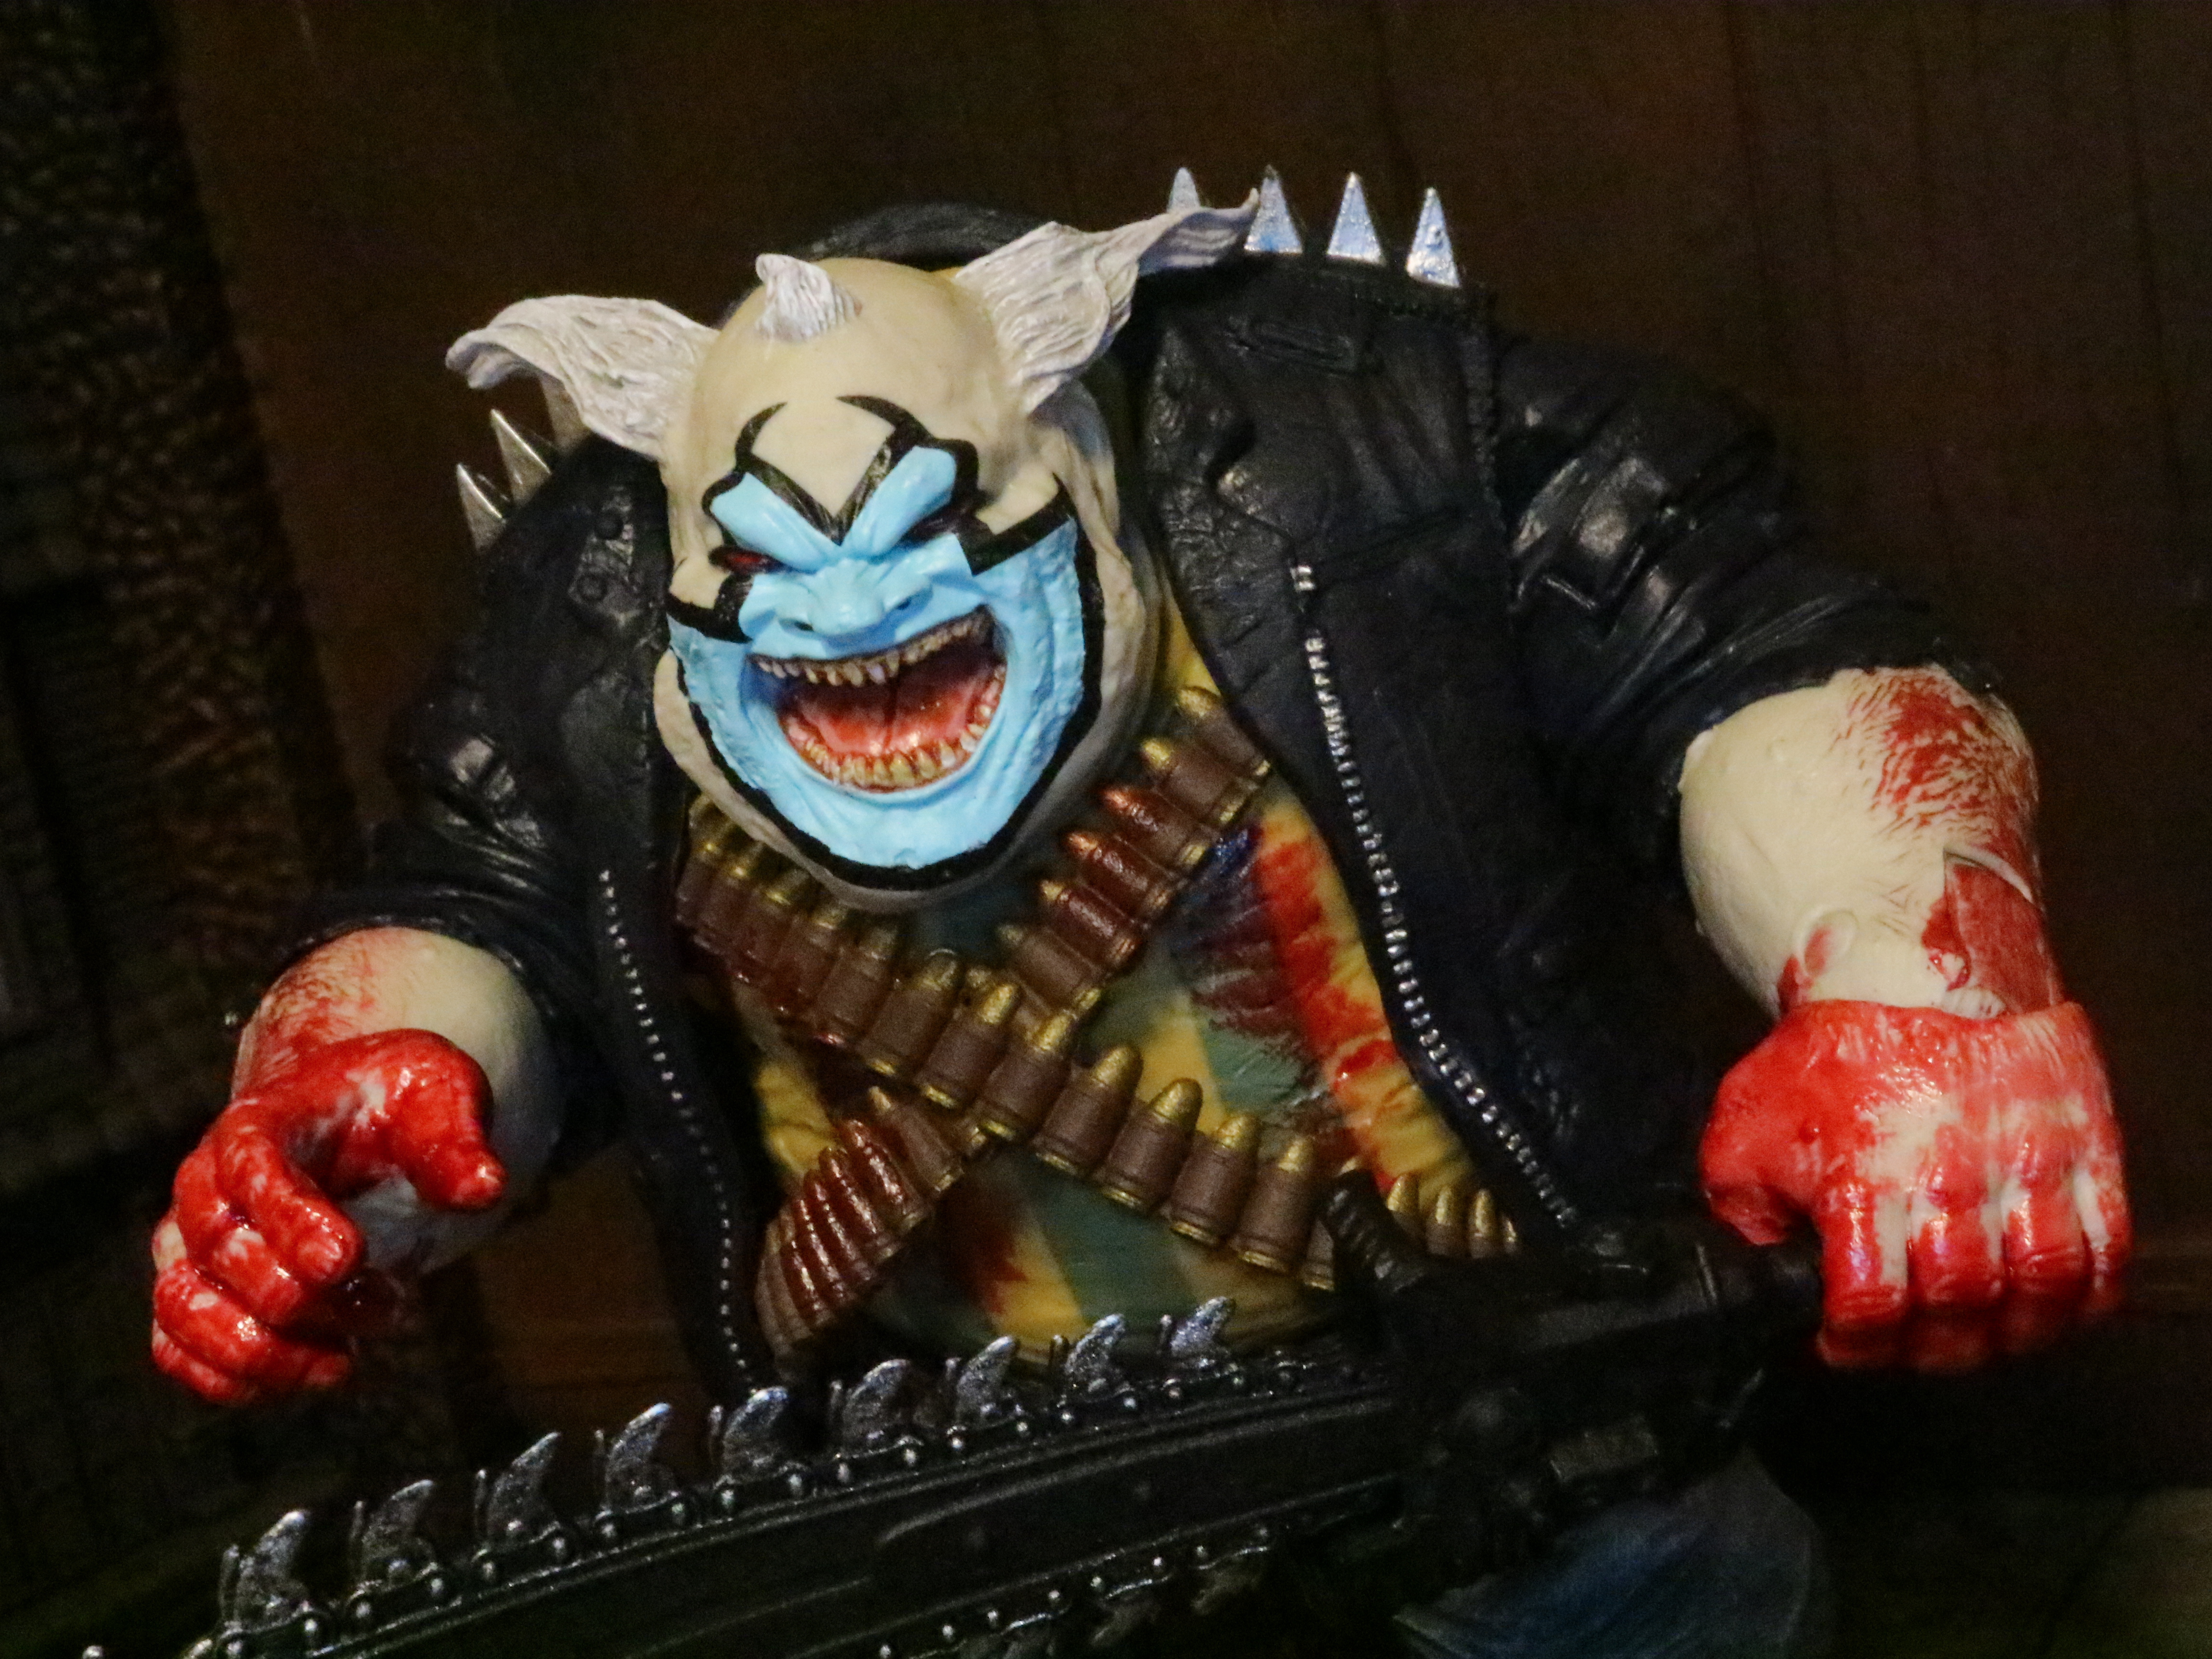 Ruwe slaap Waar Permanent Action Figure Barbecue: Action Figure Review: The Clown (Bloody) from Spawn  by McFarlane Toys